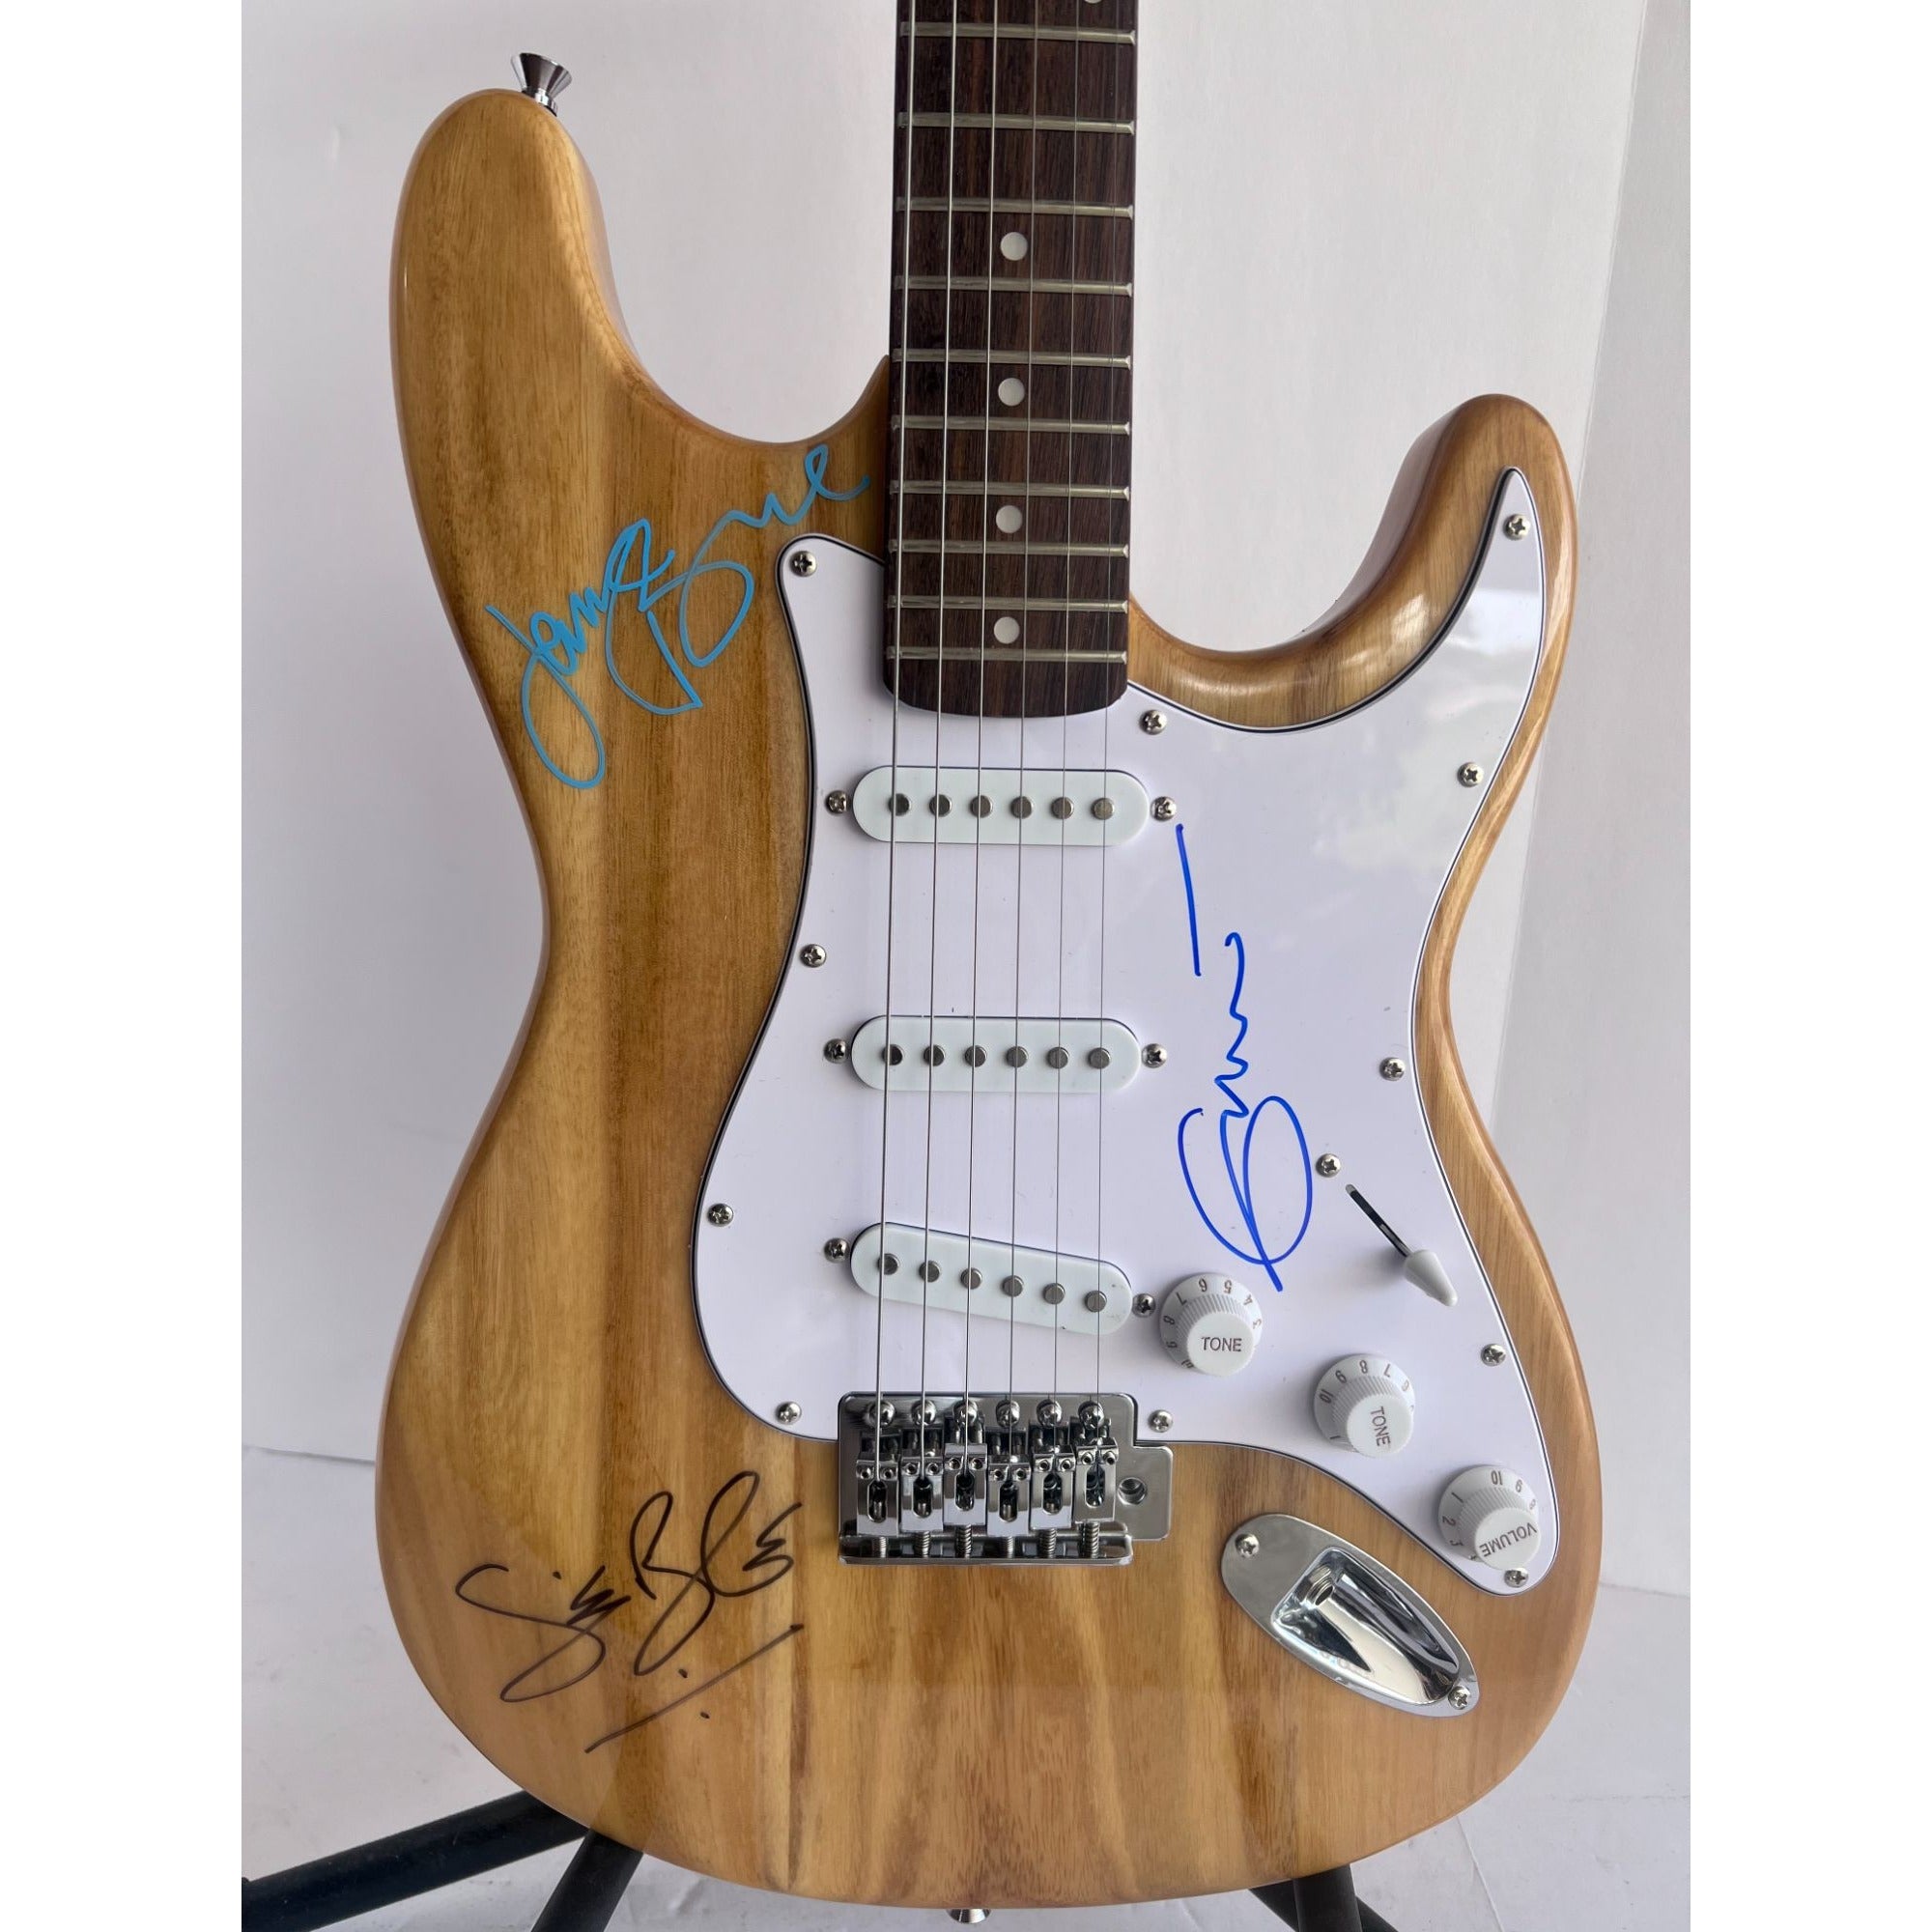 Eric Clapton Ginger Baker Jack Bruce Cream full size Huntington Stratocaster electric guitar signed with proof